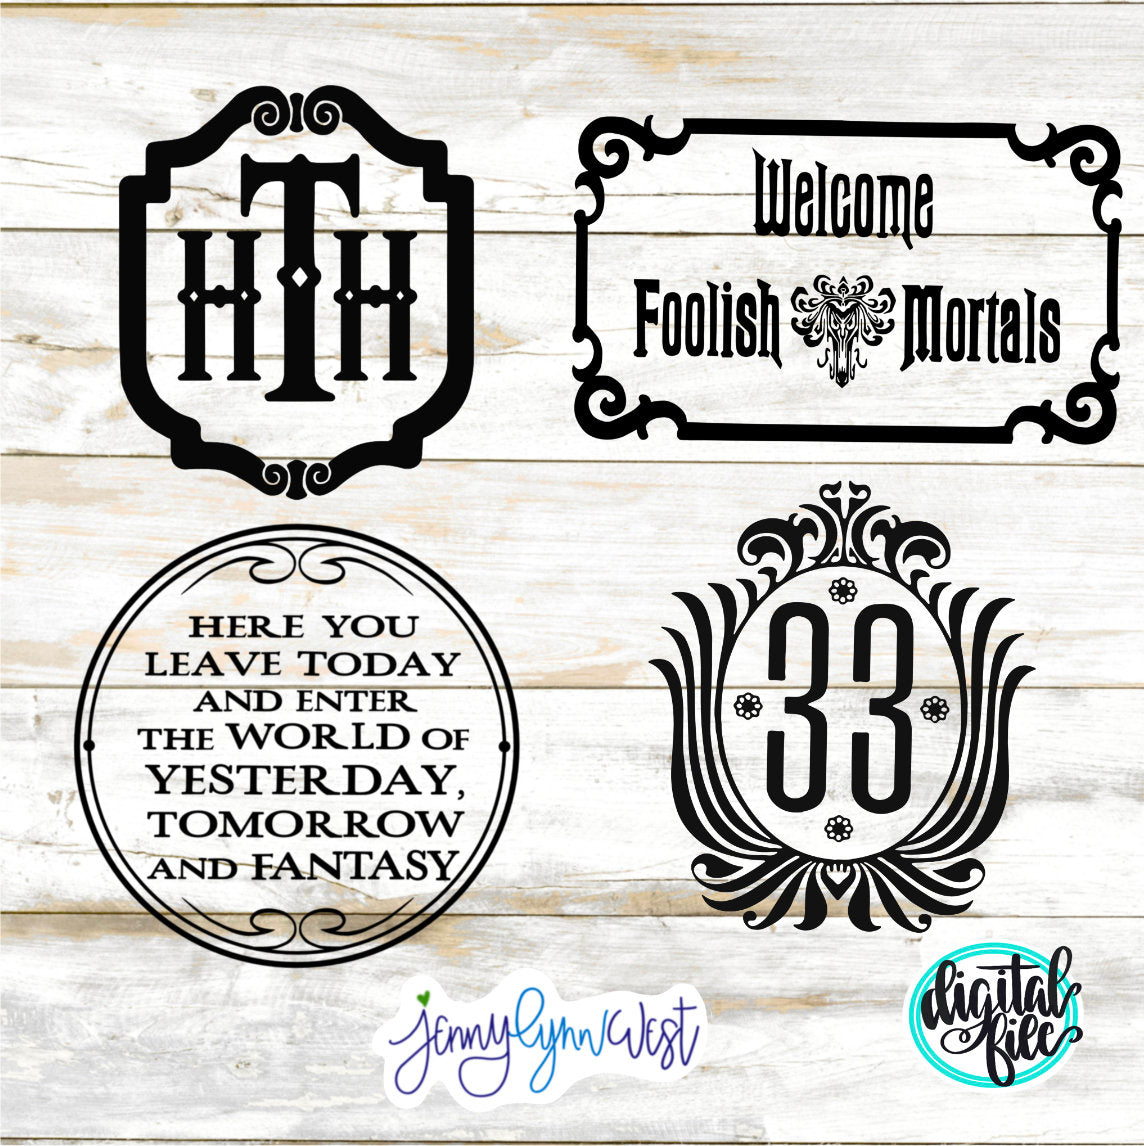 Welcome Foolish Mortal SVG DisneySigns Plaques Club 33 Hollywood Terror Hotel DisneySVG Dxf Cricut Silhouette SVG Iron On Sublimation Png